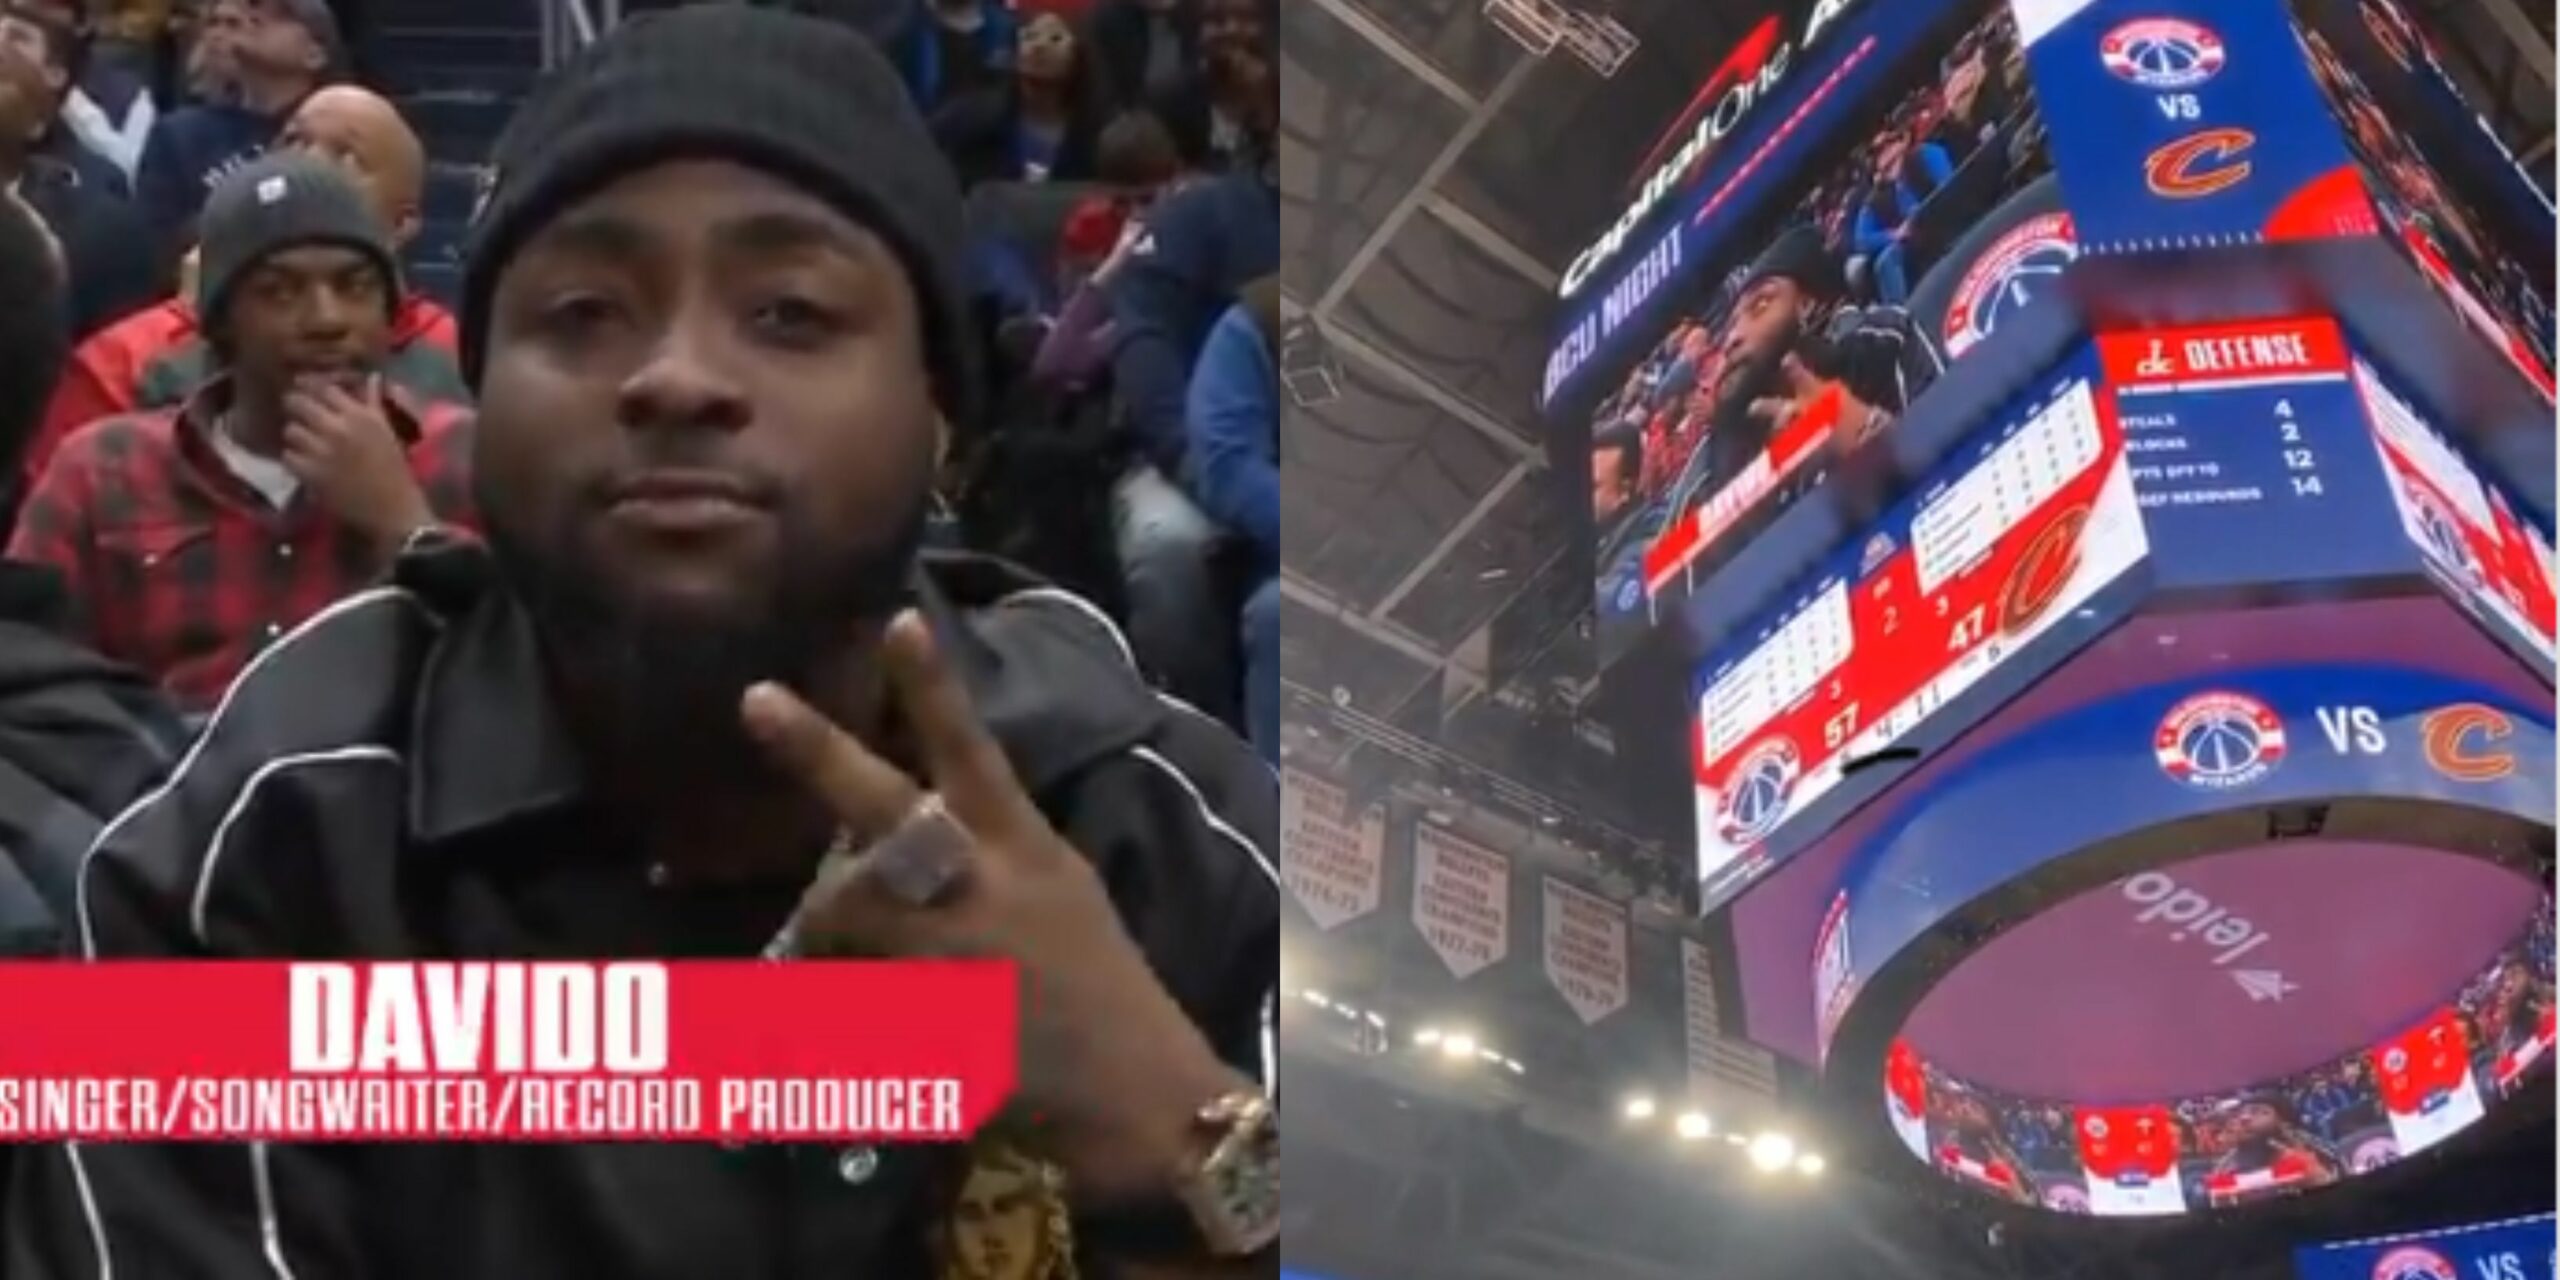 Watch how Davido almost started laughing on Live TV as he gets VIP treatment in an NBA game (Video)